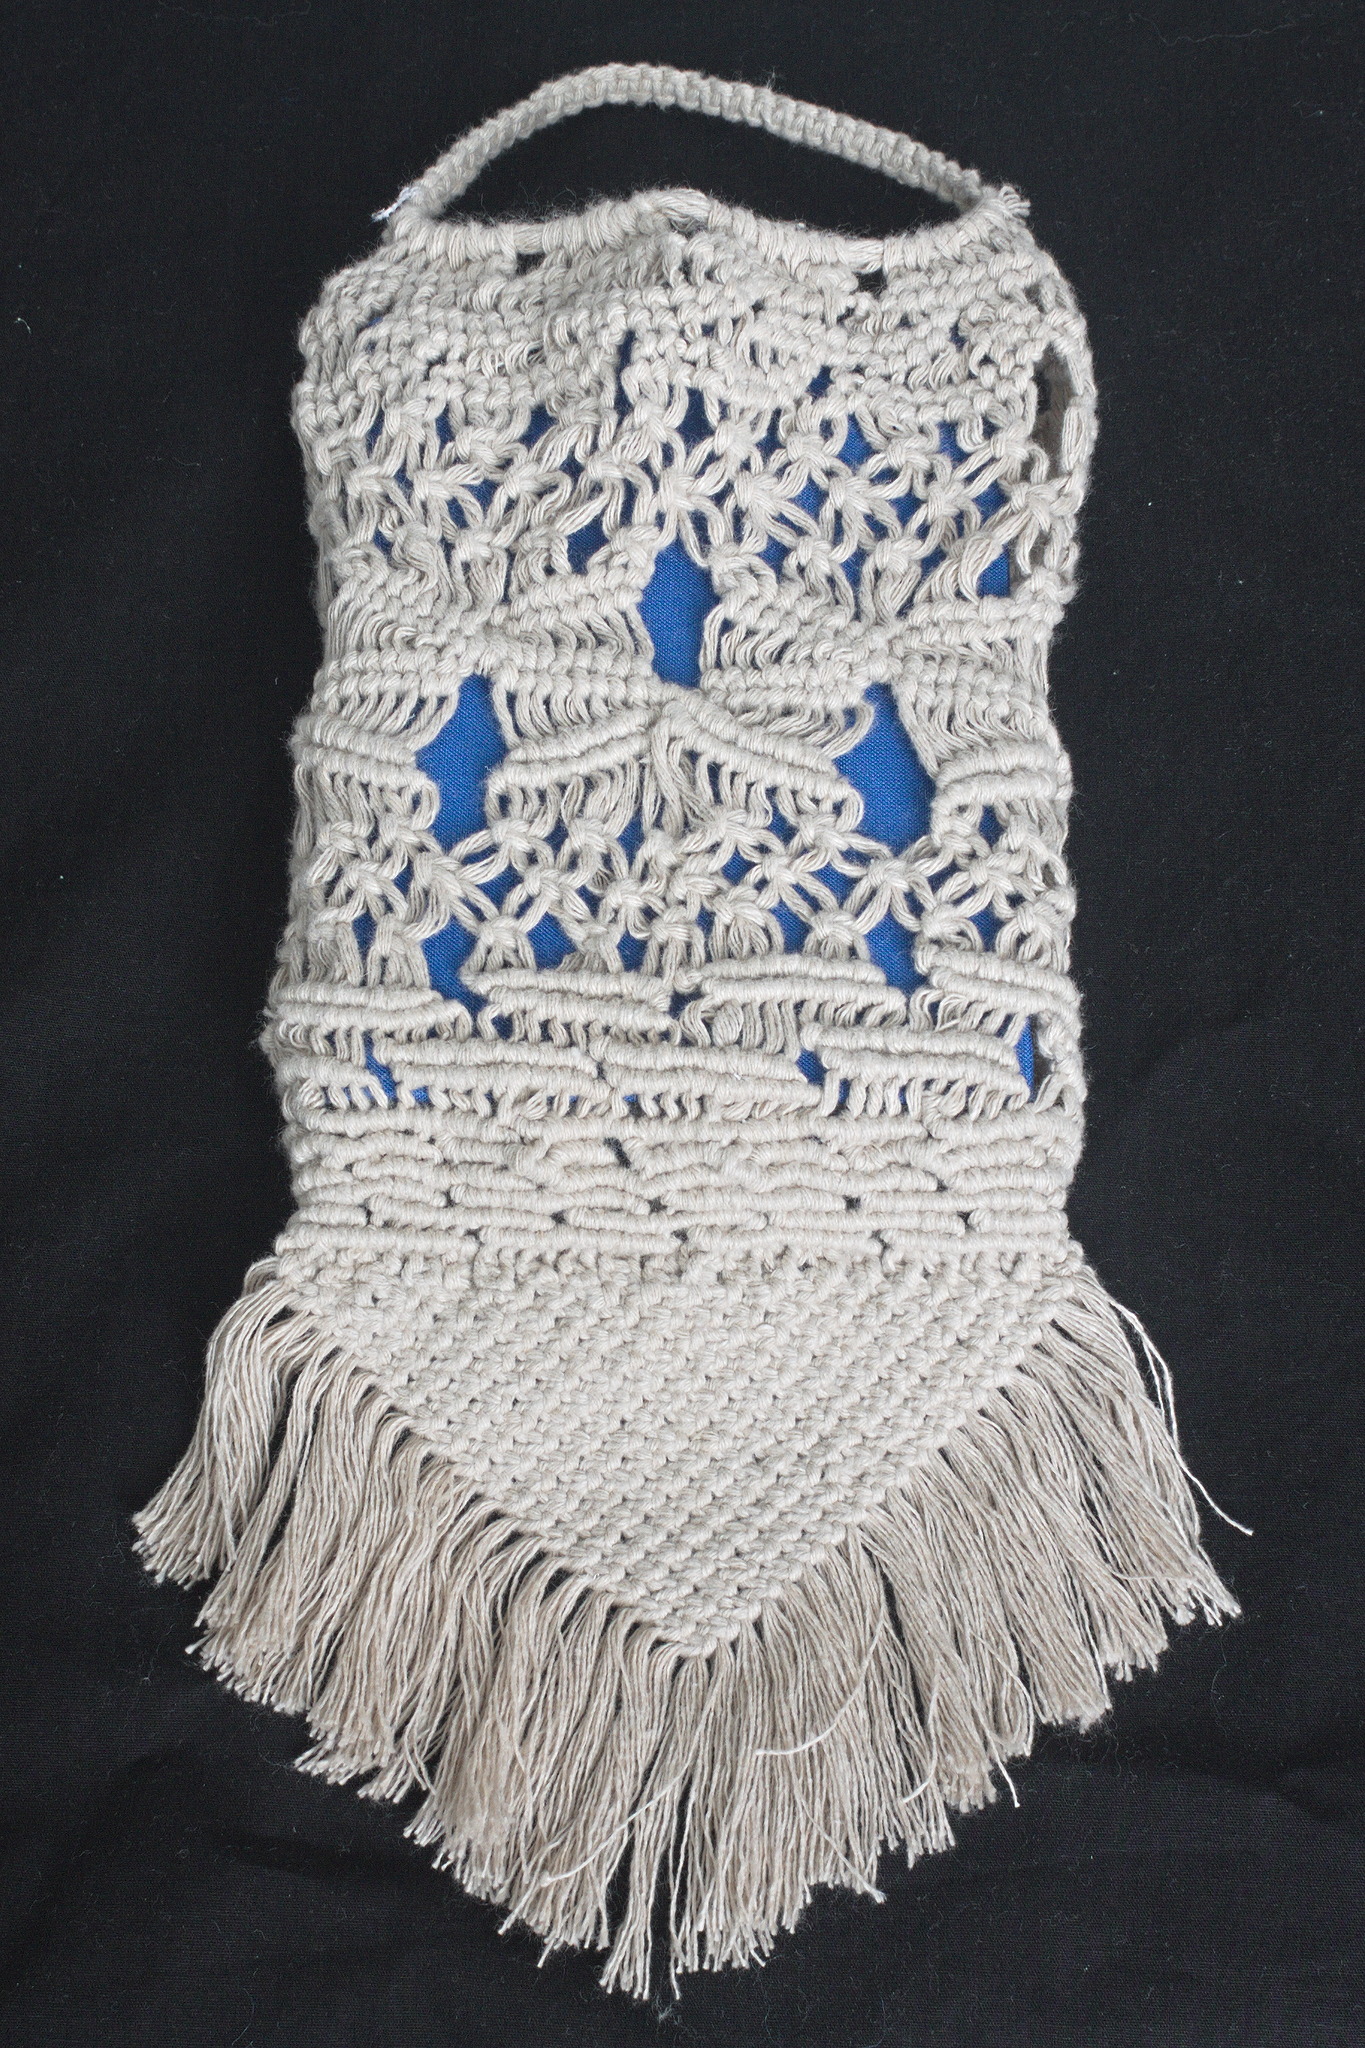 a macrame bag in ~3 mm ecru yarn, with very irregular knots of
different types, holding a book with a blue cover. The bottom part
has a rigid single layer triangle and a fringe.